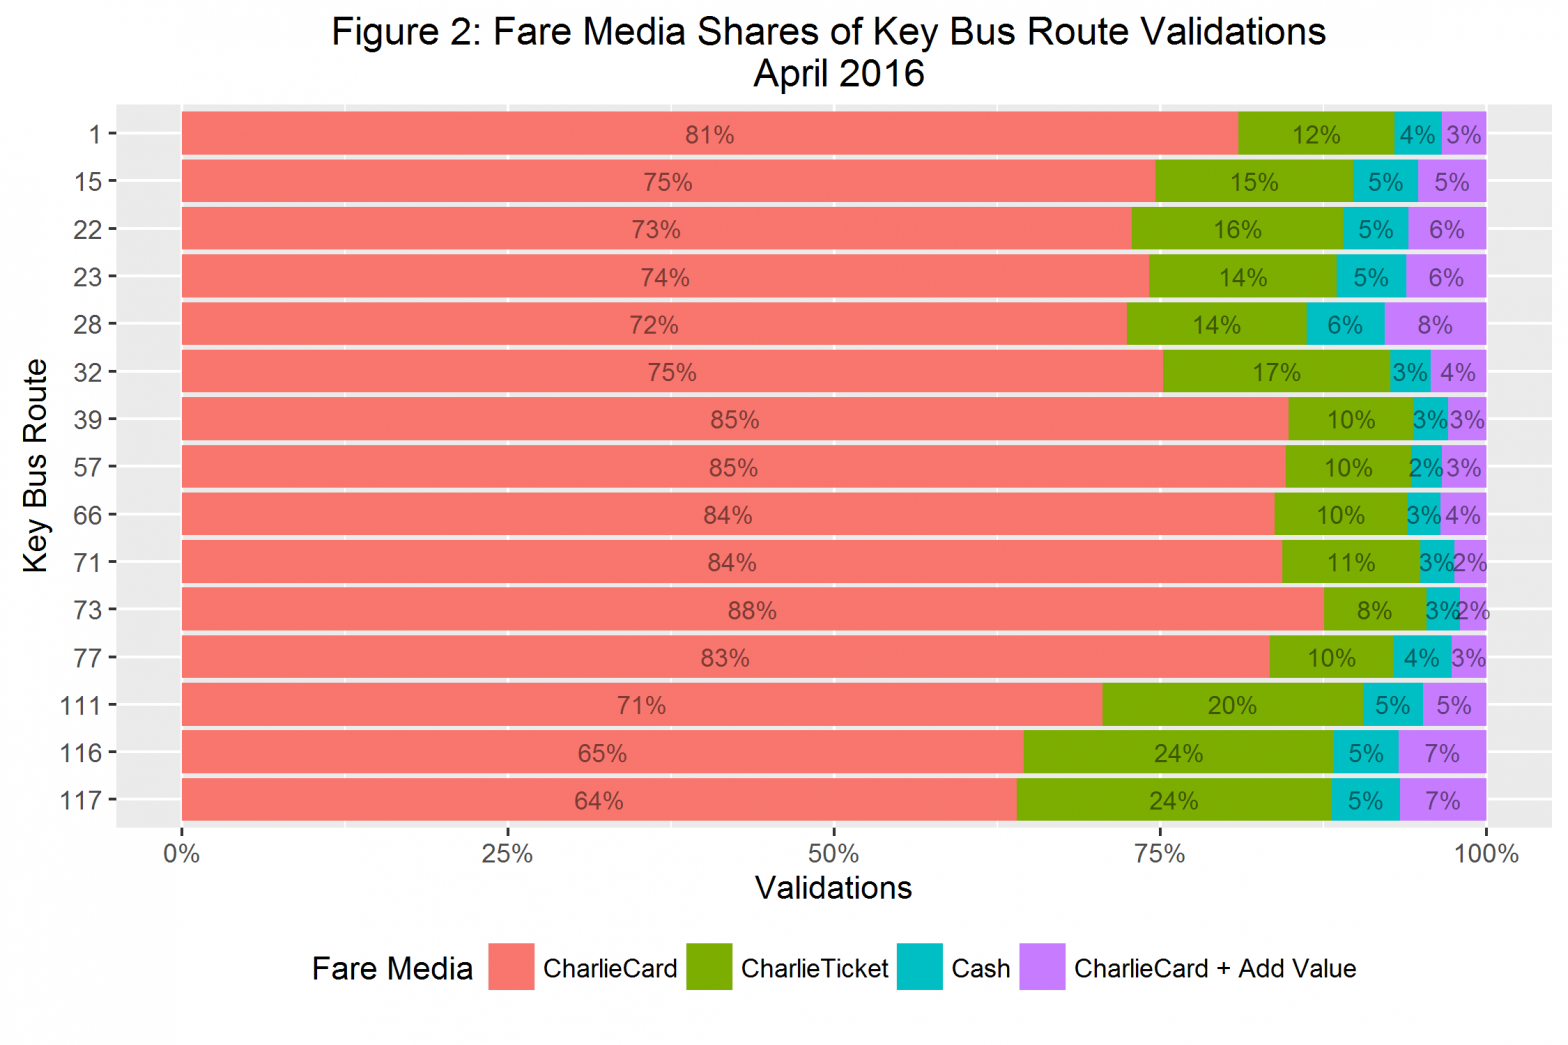 Fare Media on key bus by route